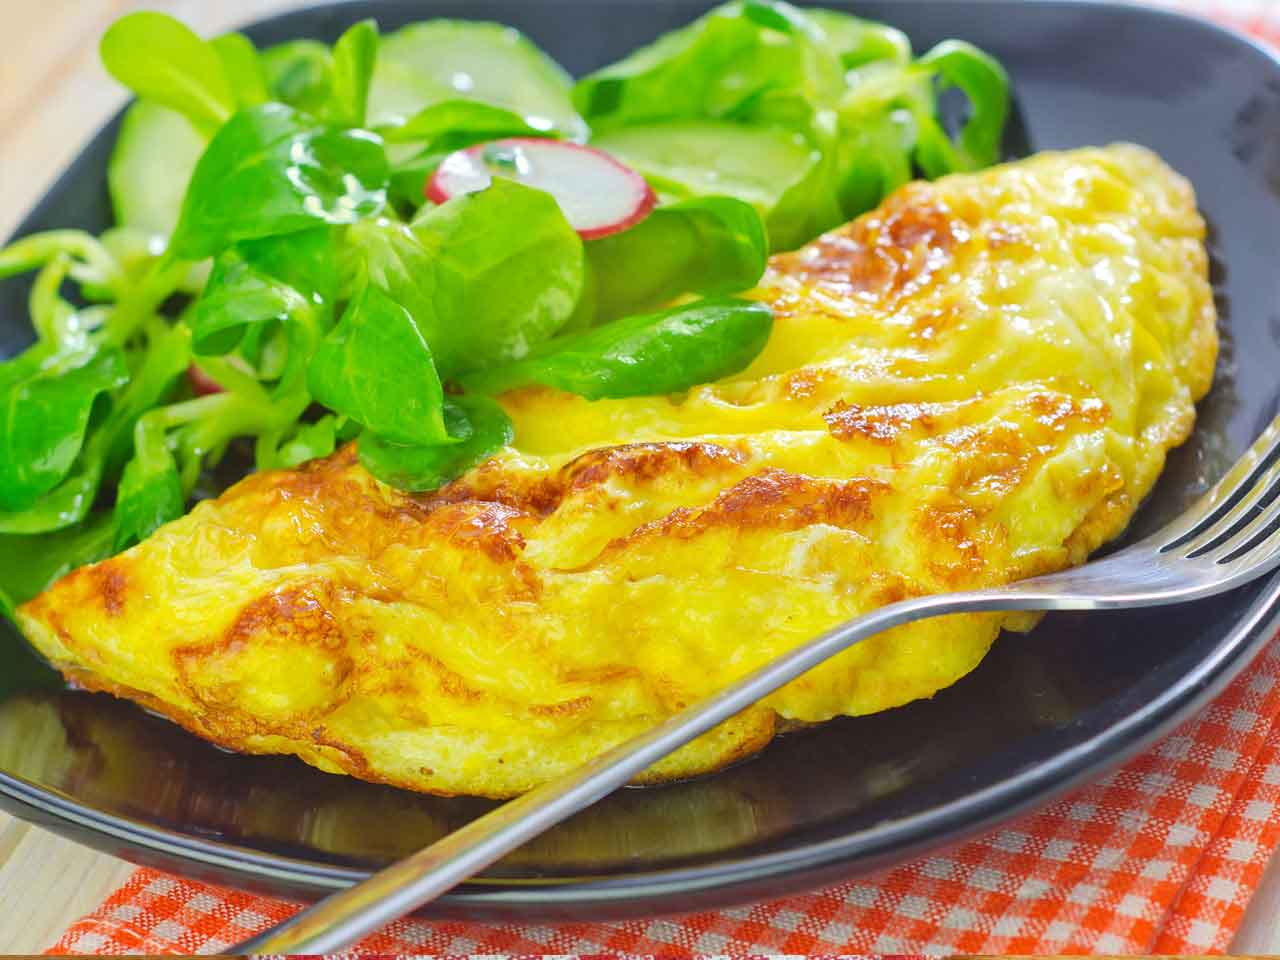 A tempting omelette